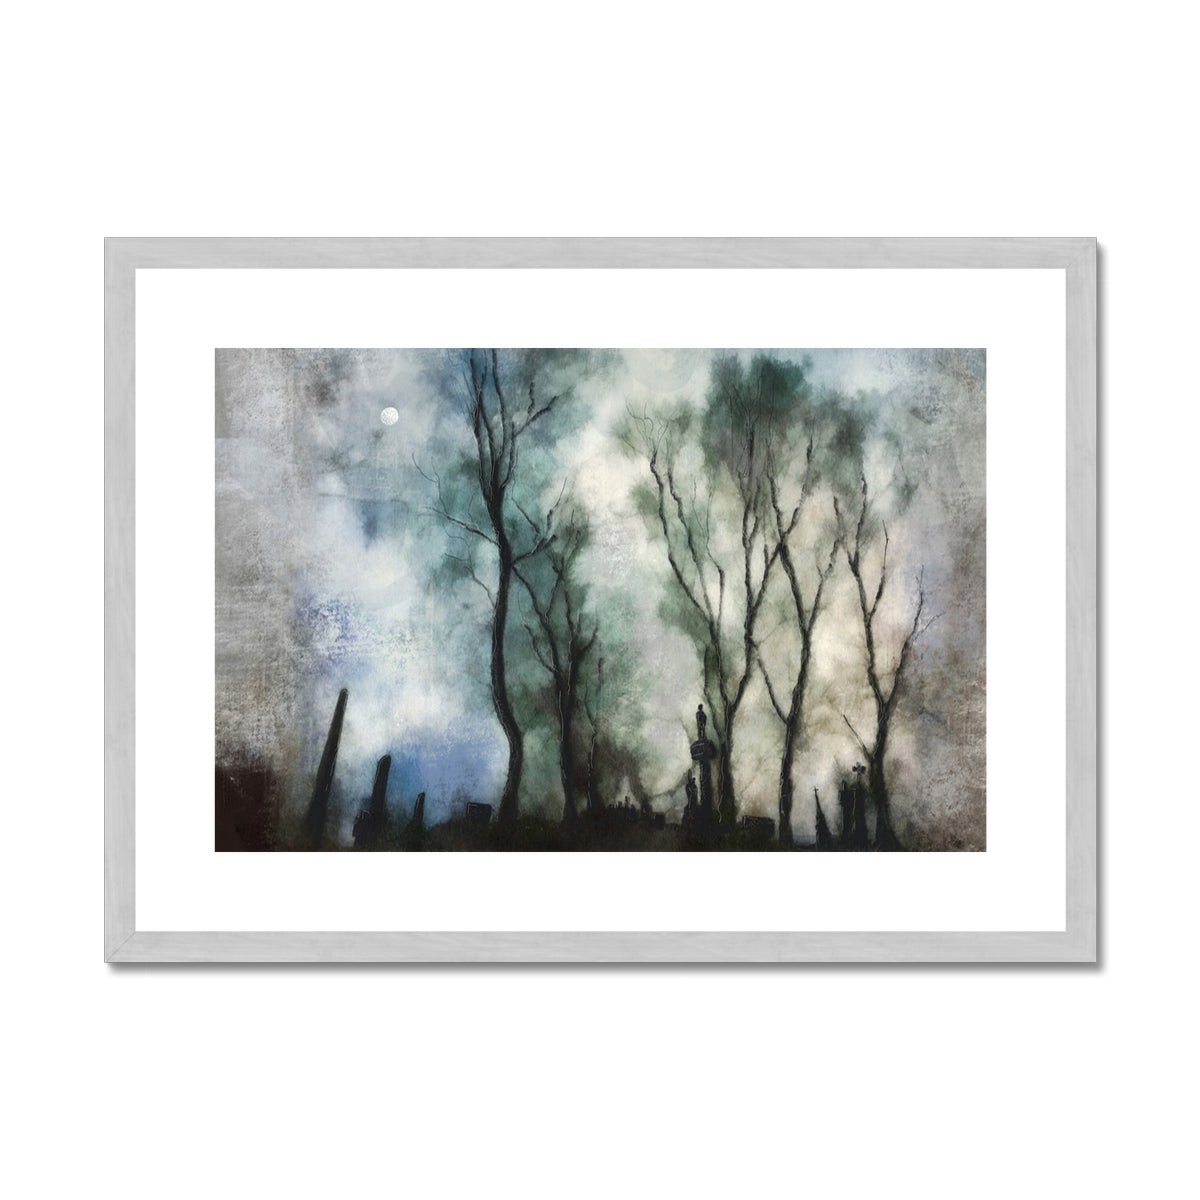 Glasgow Necropolis Moonlight Painting | Antique Framed & Mounted Prints From Scotland-Antique Framed & Mounted Prints-Edinburgh & Glasgow Art Gallery-A2 Landscape-Silver Frame-Paintings, Prints, Homeware, Art Gifts From Scotland By Scottish Artist Kevin Hunter